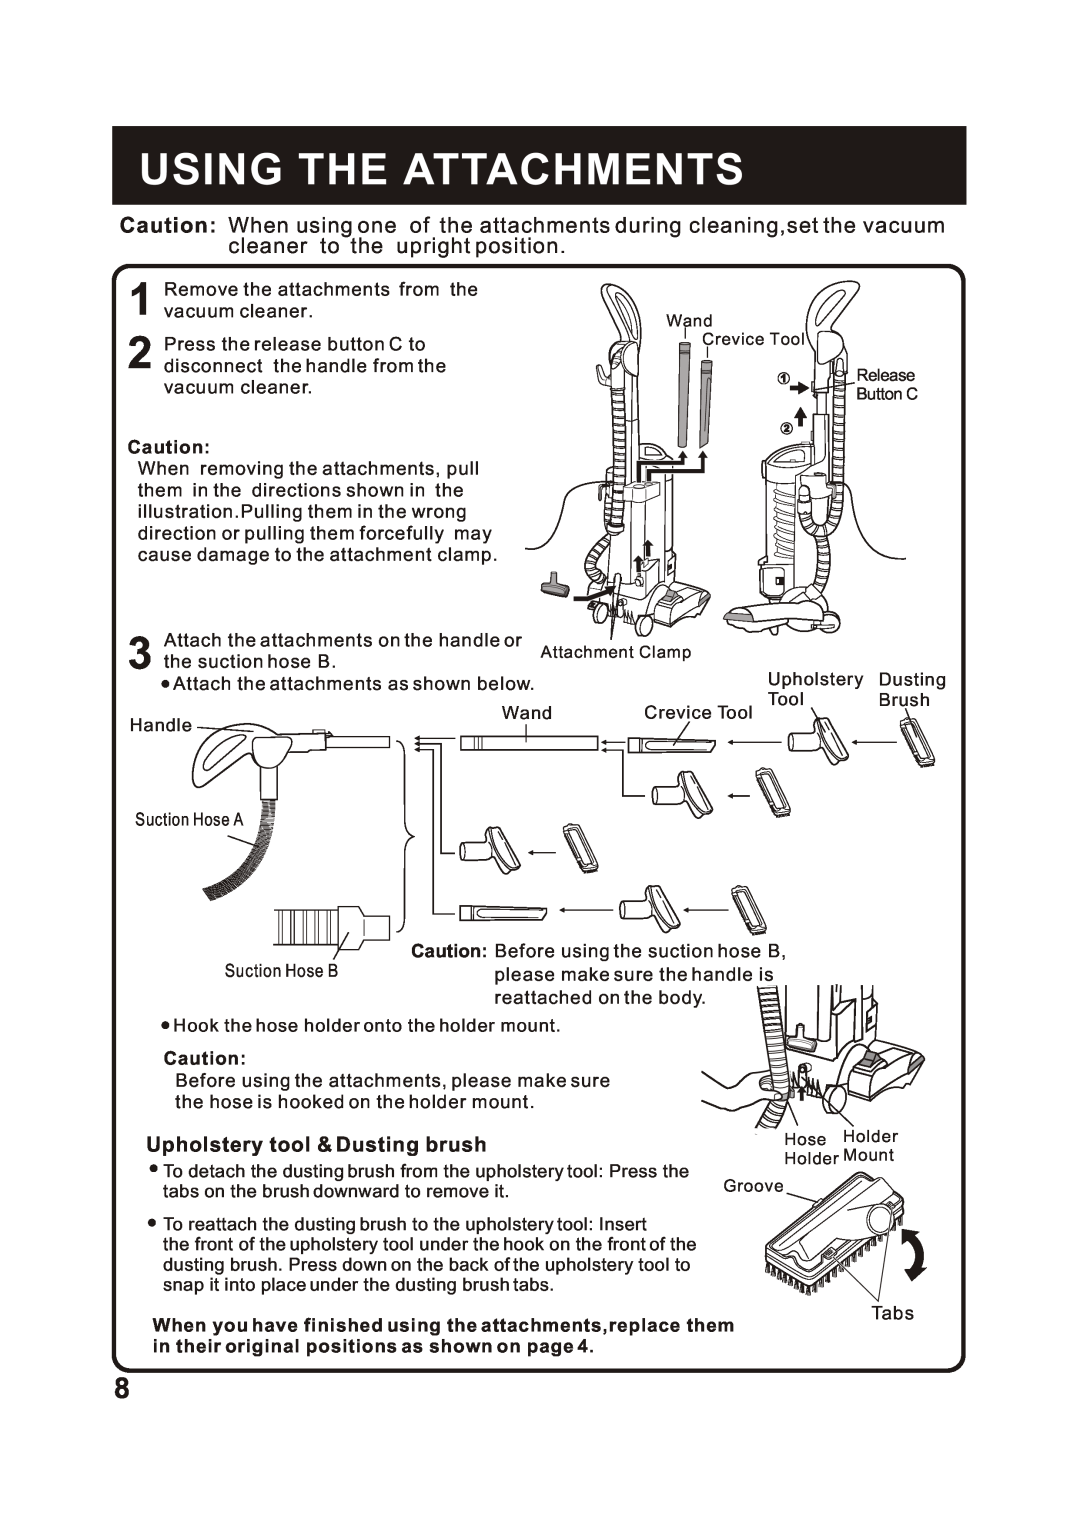 Fantom Vacuum FM742C instruction manual Using The Attachments, Upholstery tool & Dusting brush 